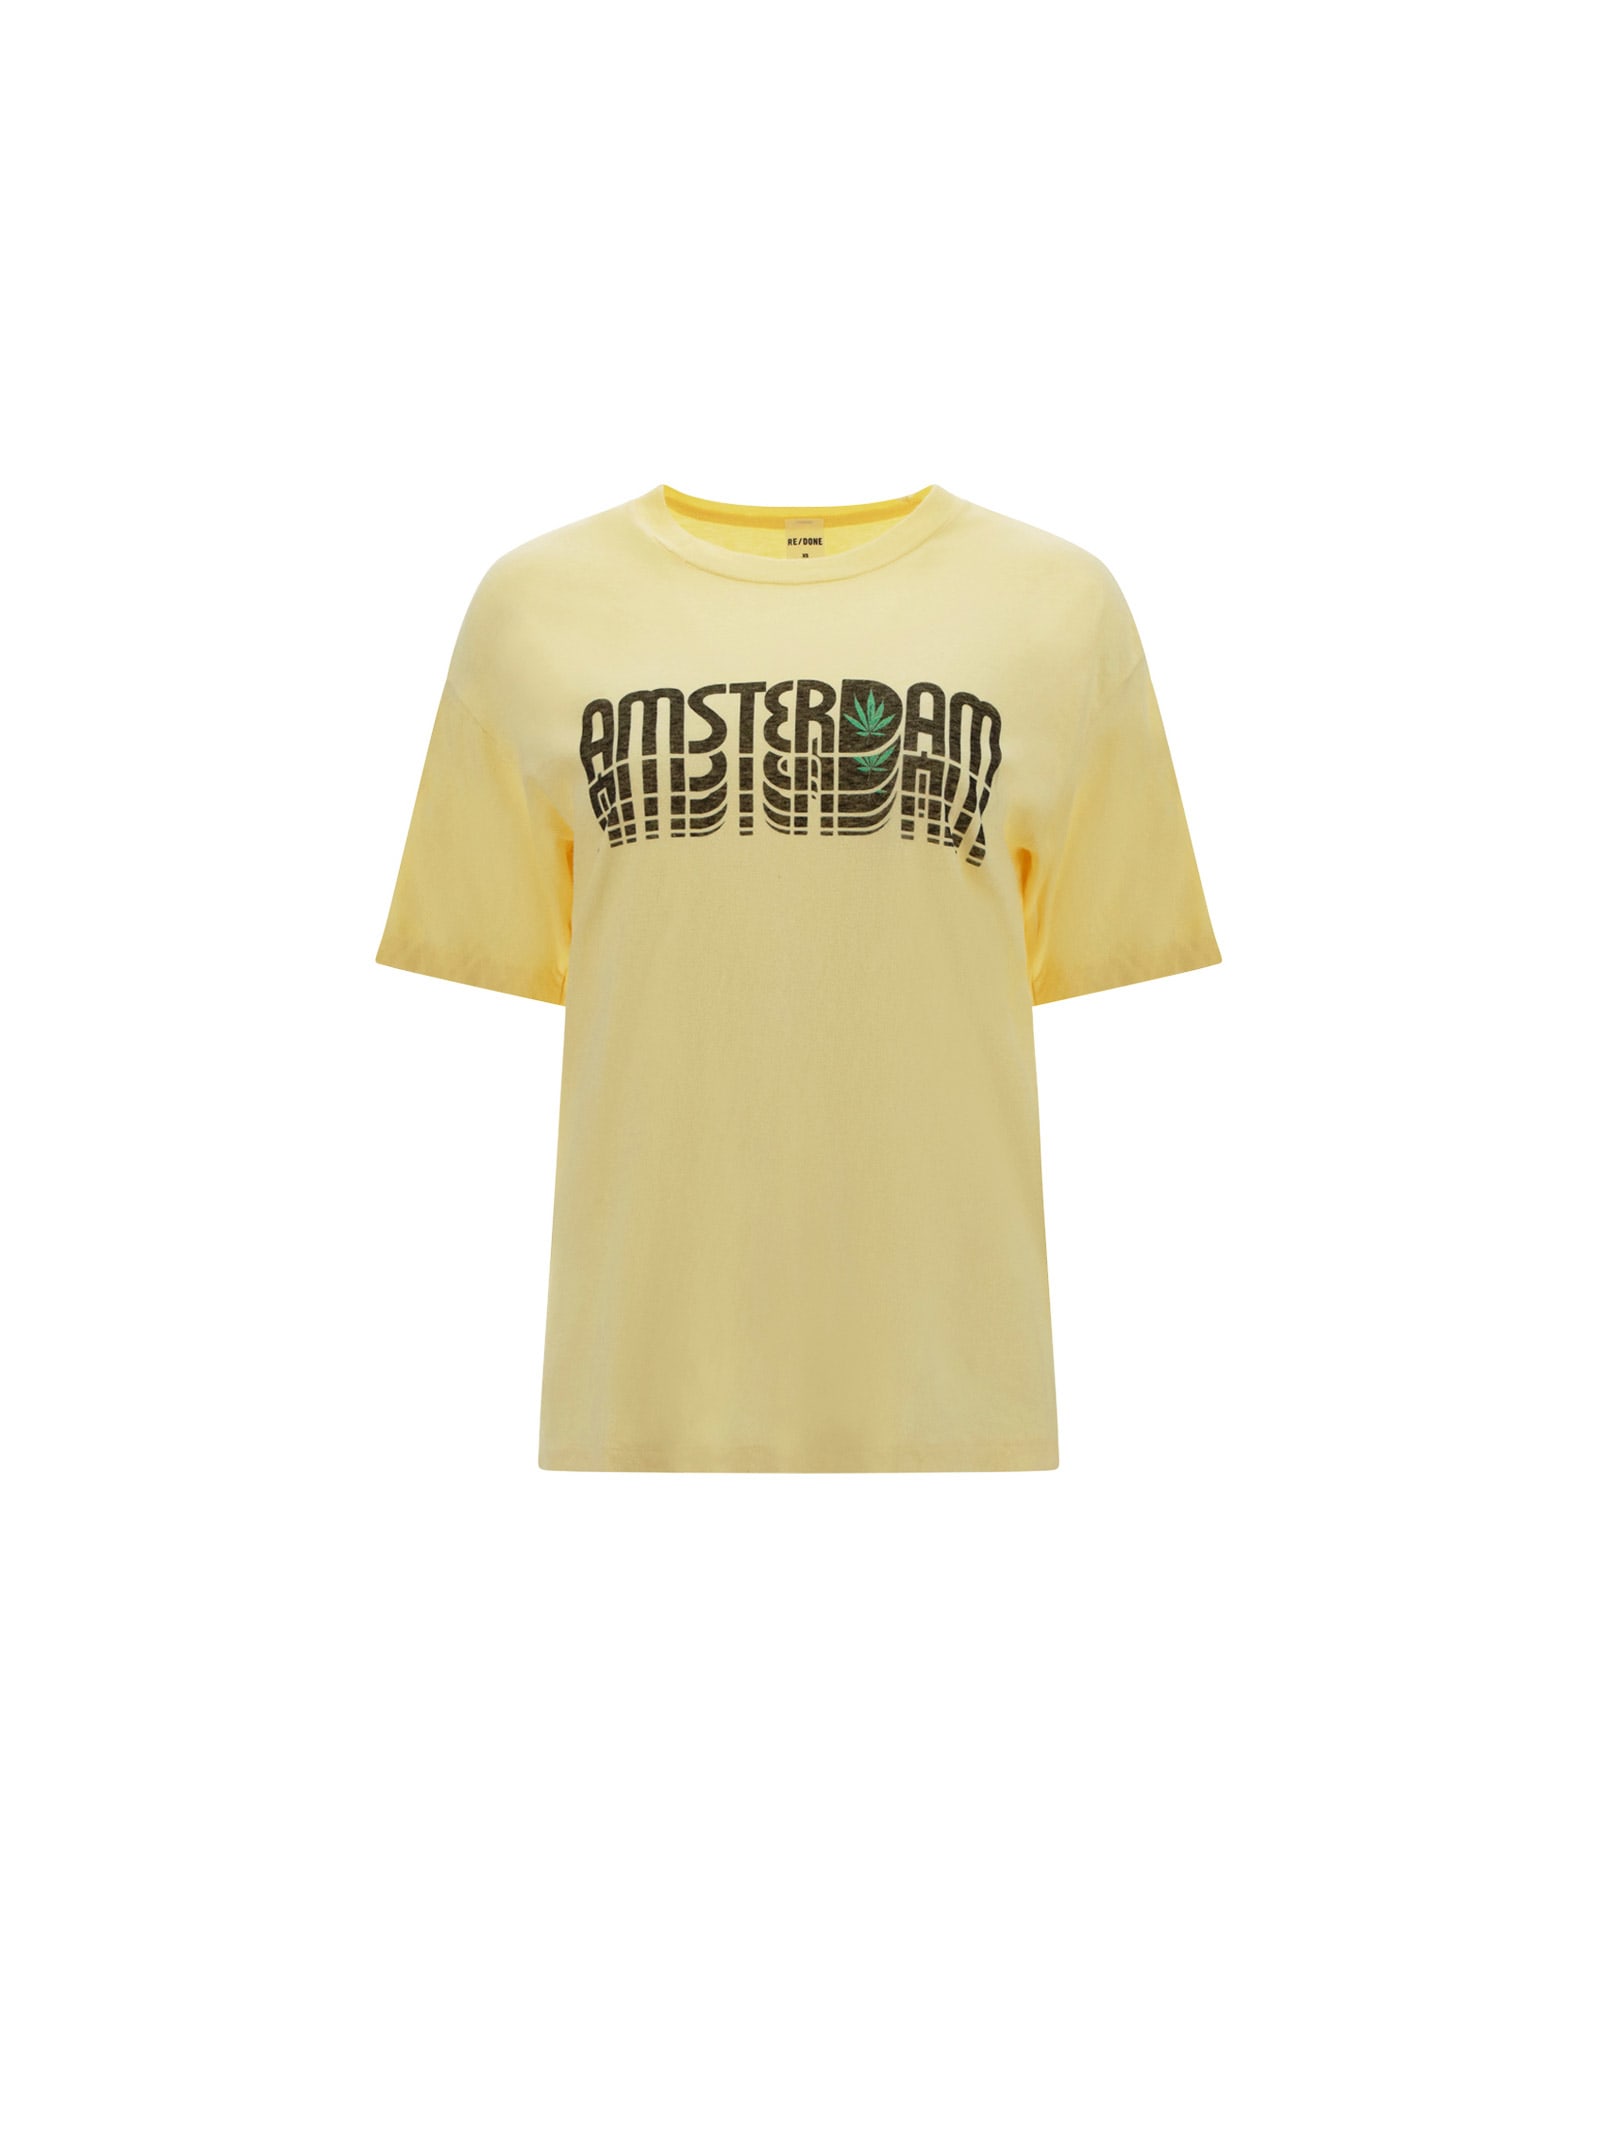 RE/DONE Amsterdam T-shirt